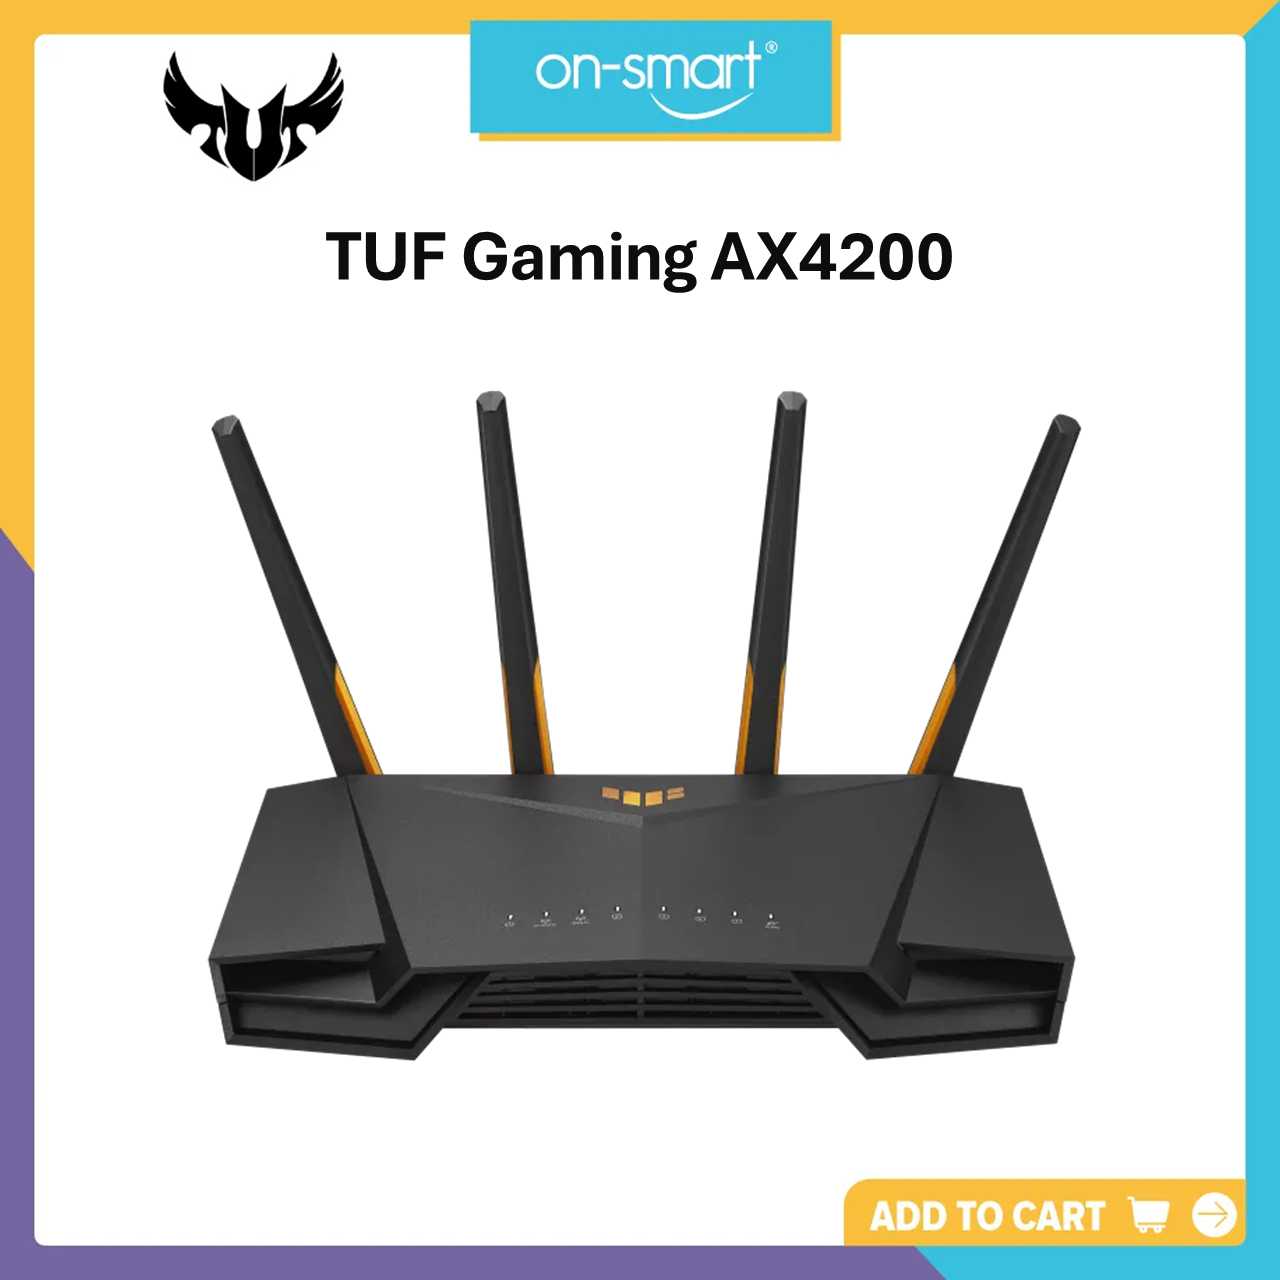 ASUS TUF Gaming AX4200 Dual Band WiFi 6 Gaming Router with Mobile Game Mode